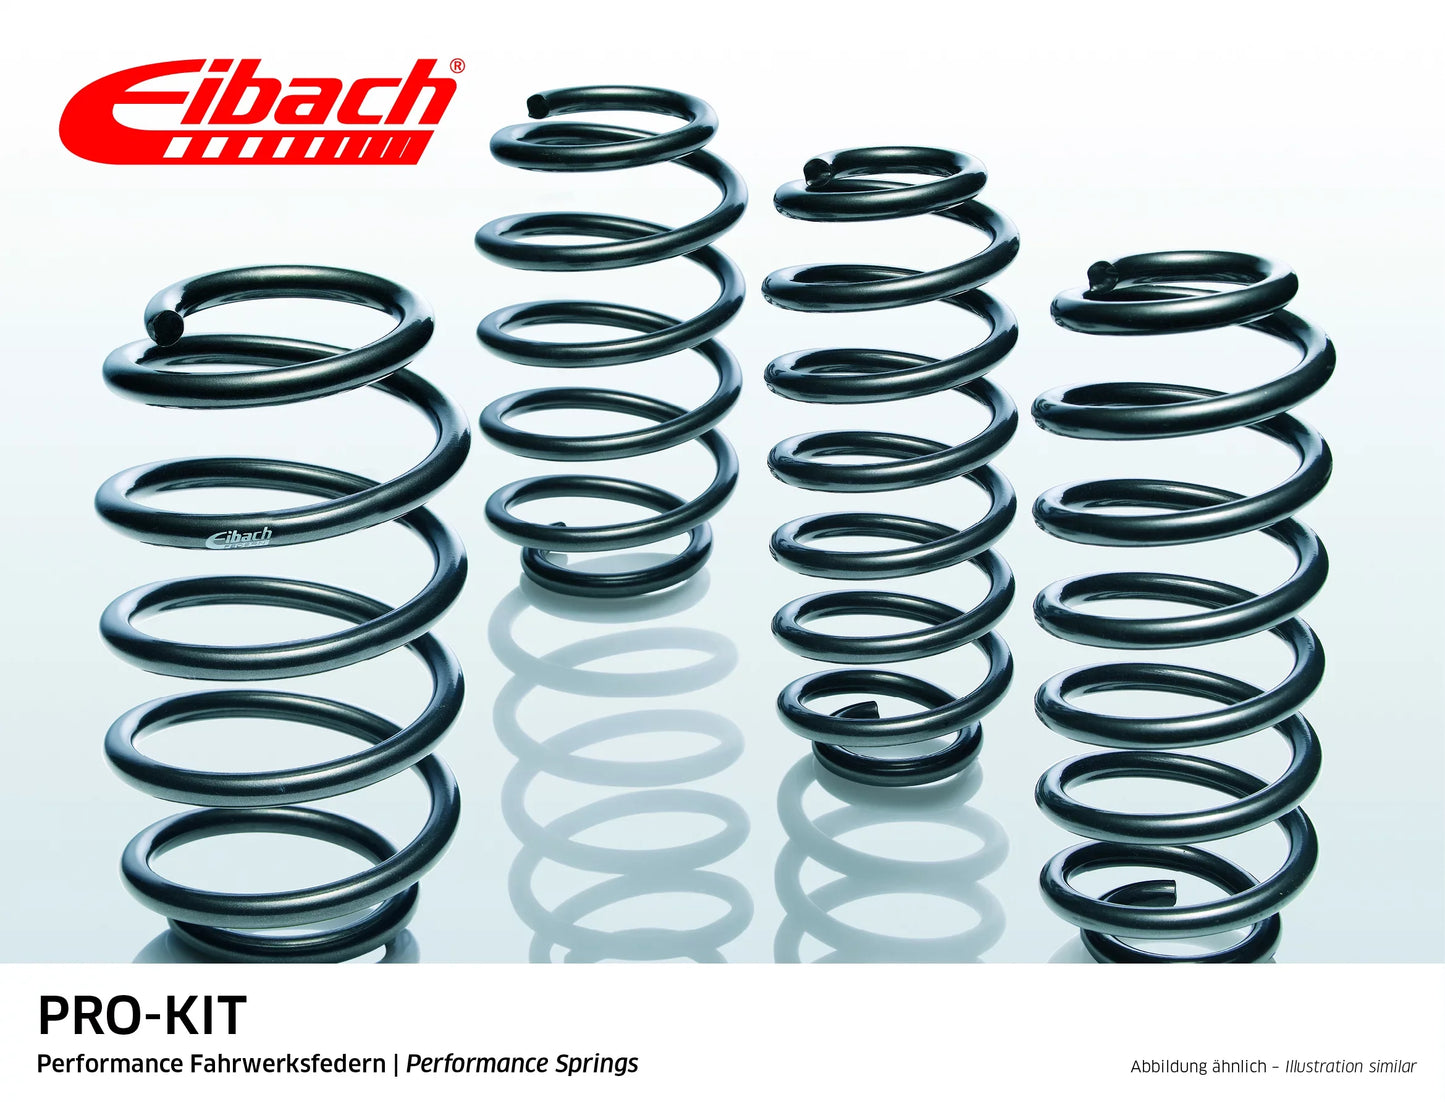 Eibach Pro-Kit Lowering Springs (E10-15-024-02-22) at £269.98